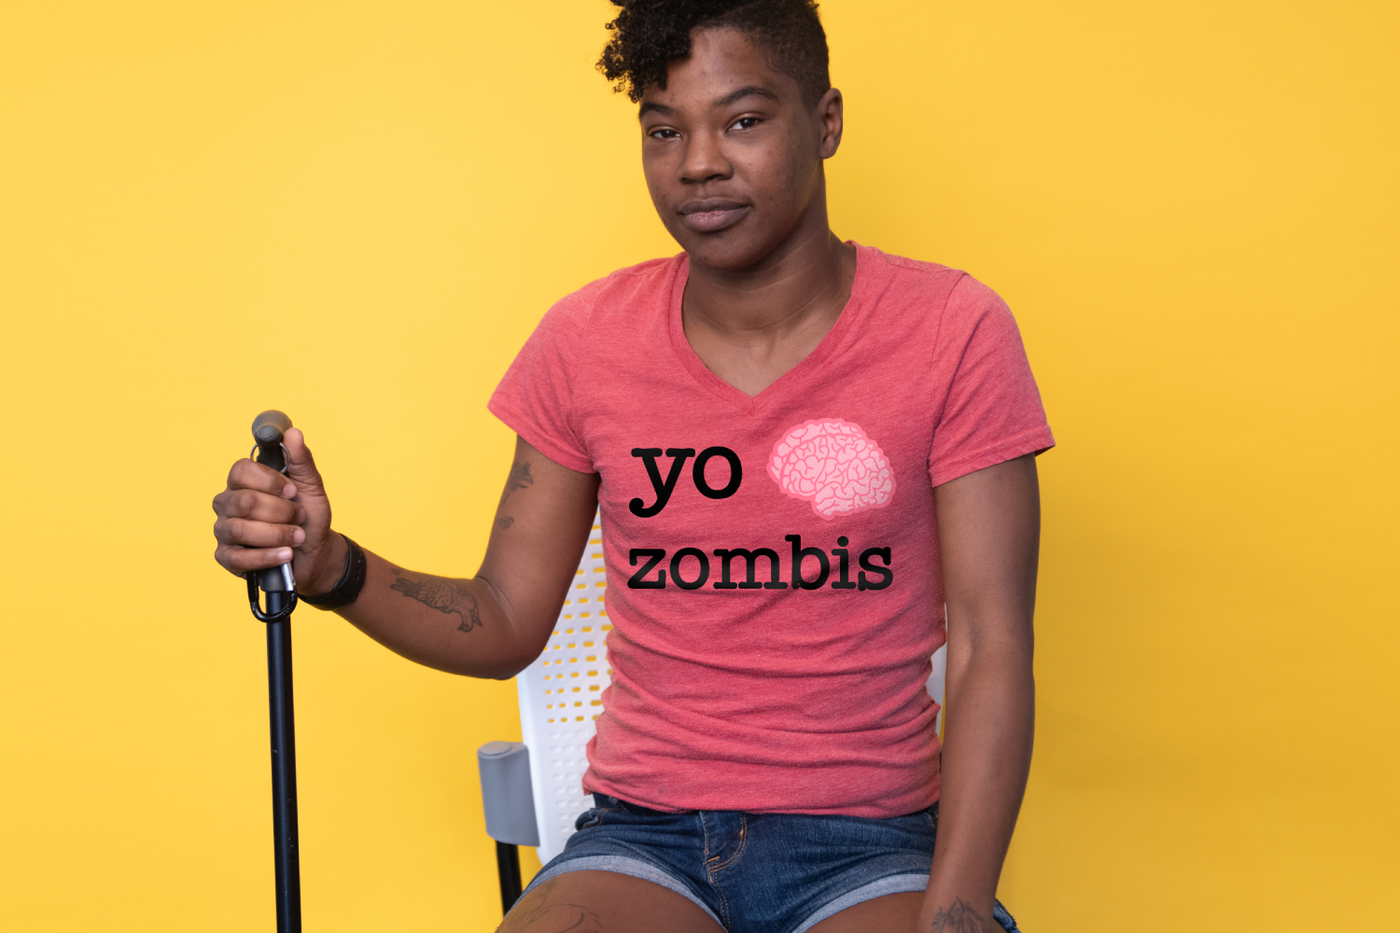 Nonbinary black person with a cane in a shirt that says "yo [brain] zombis"